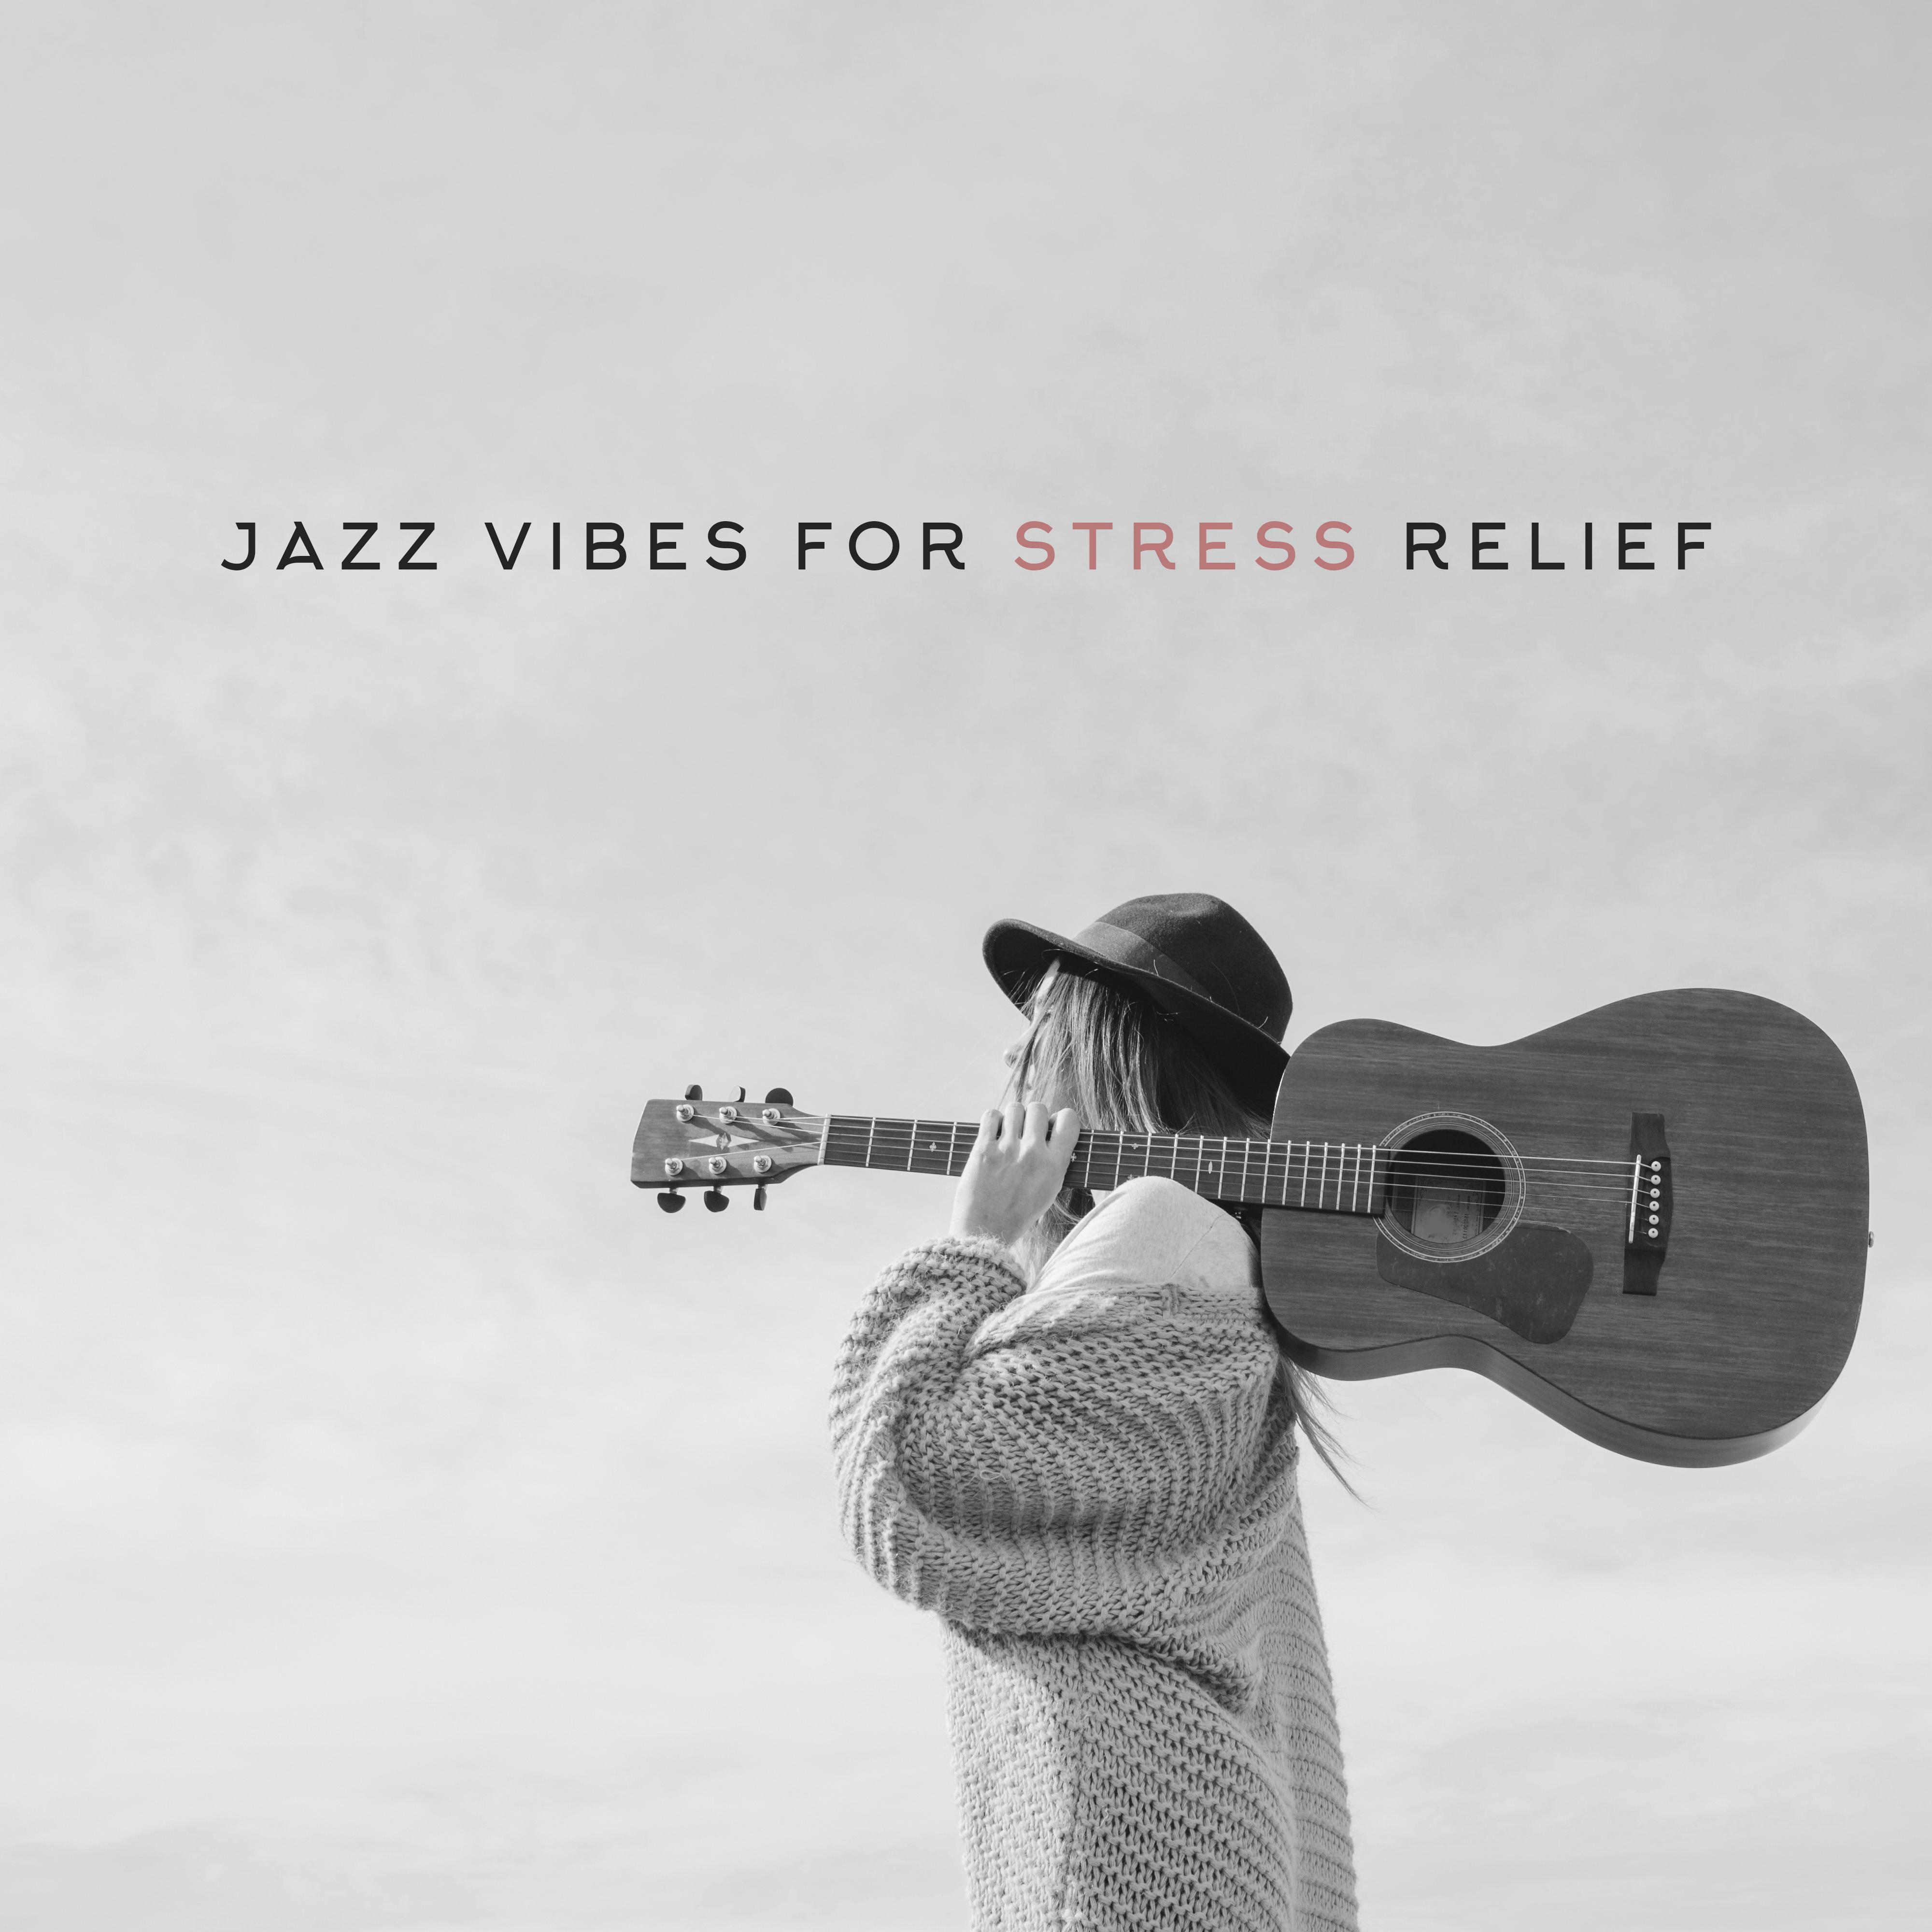 Jazz Vibes for Stress Relief